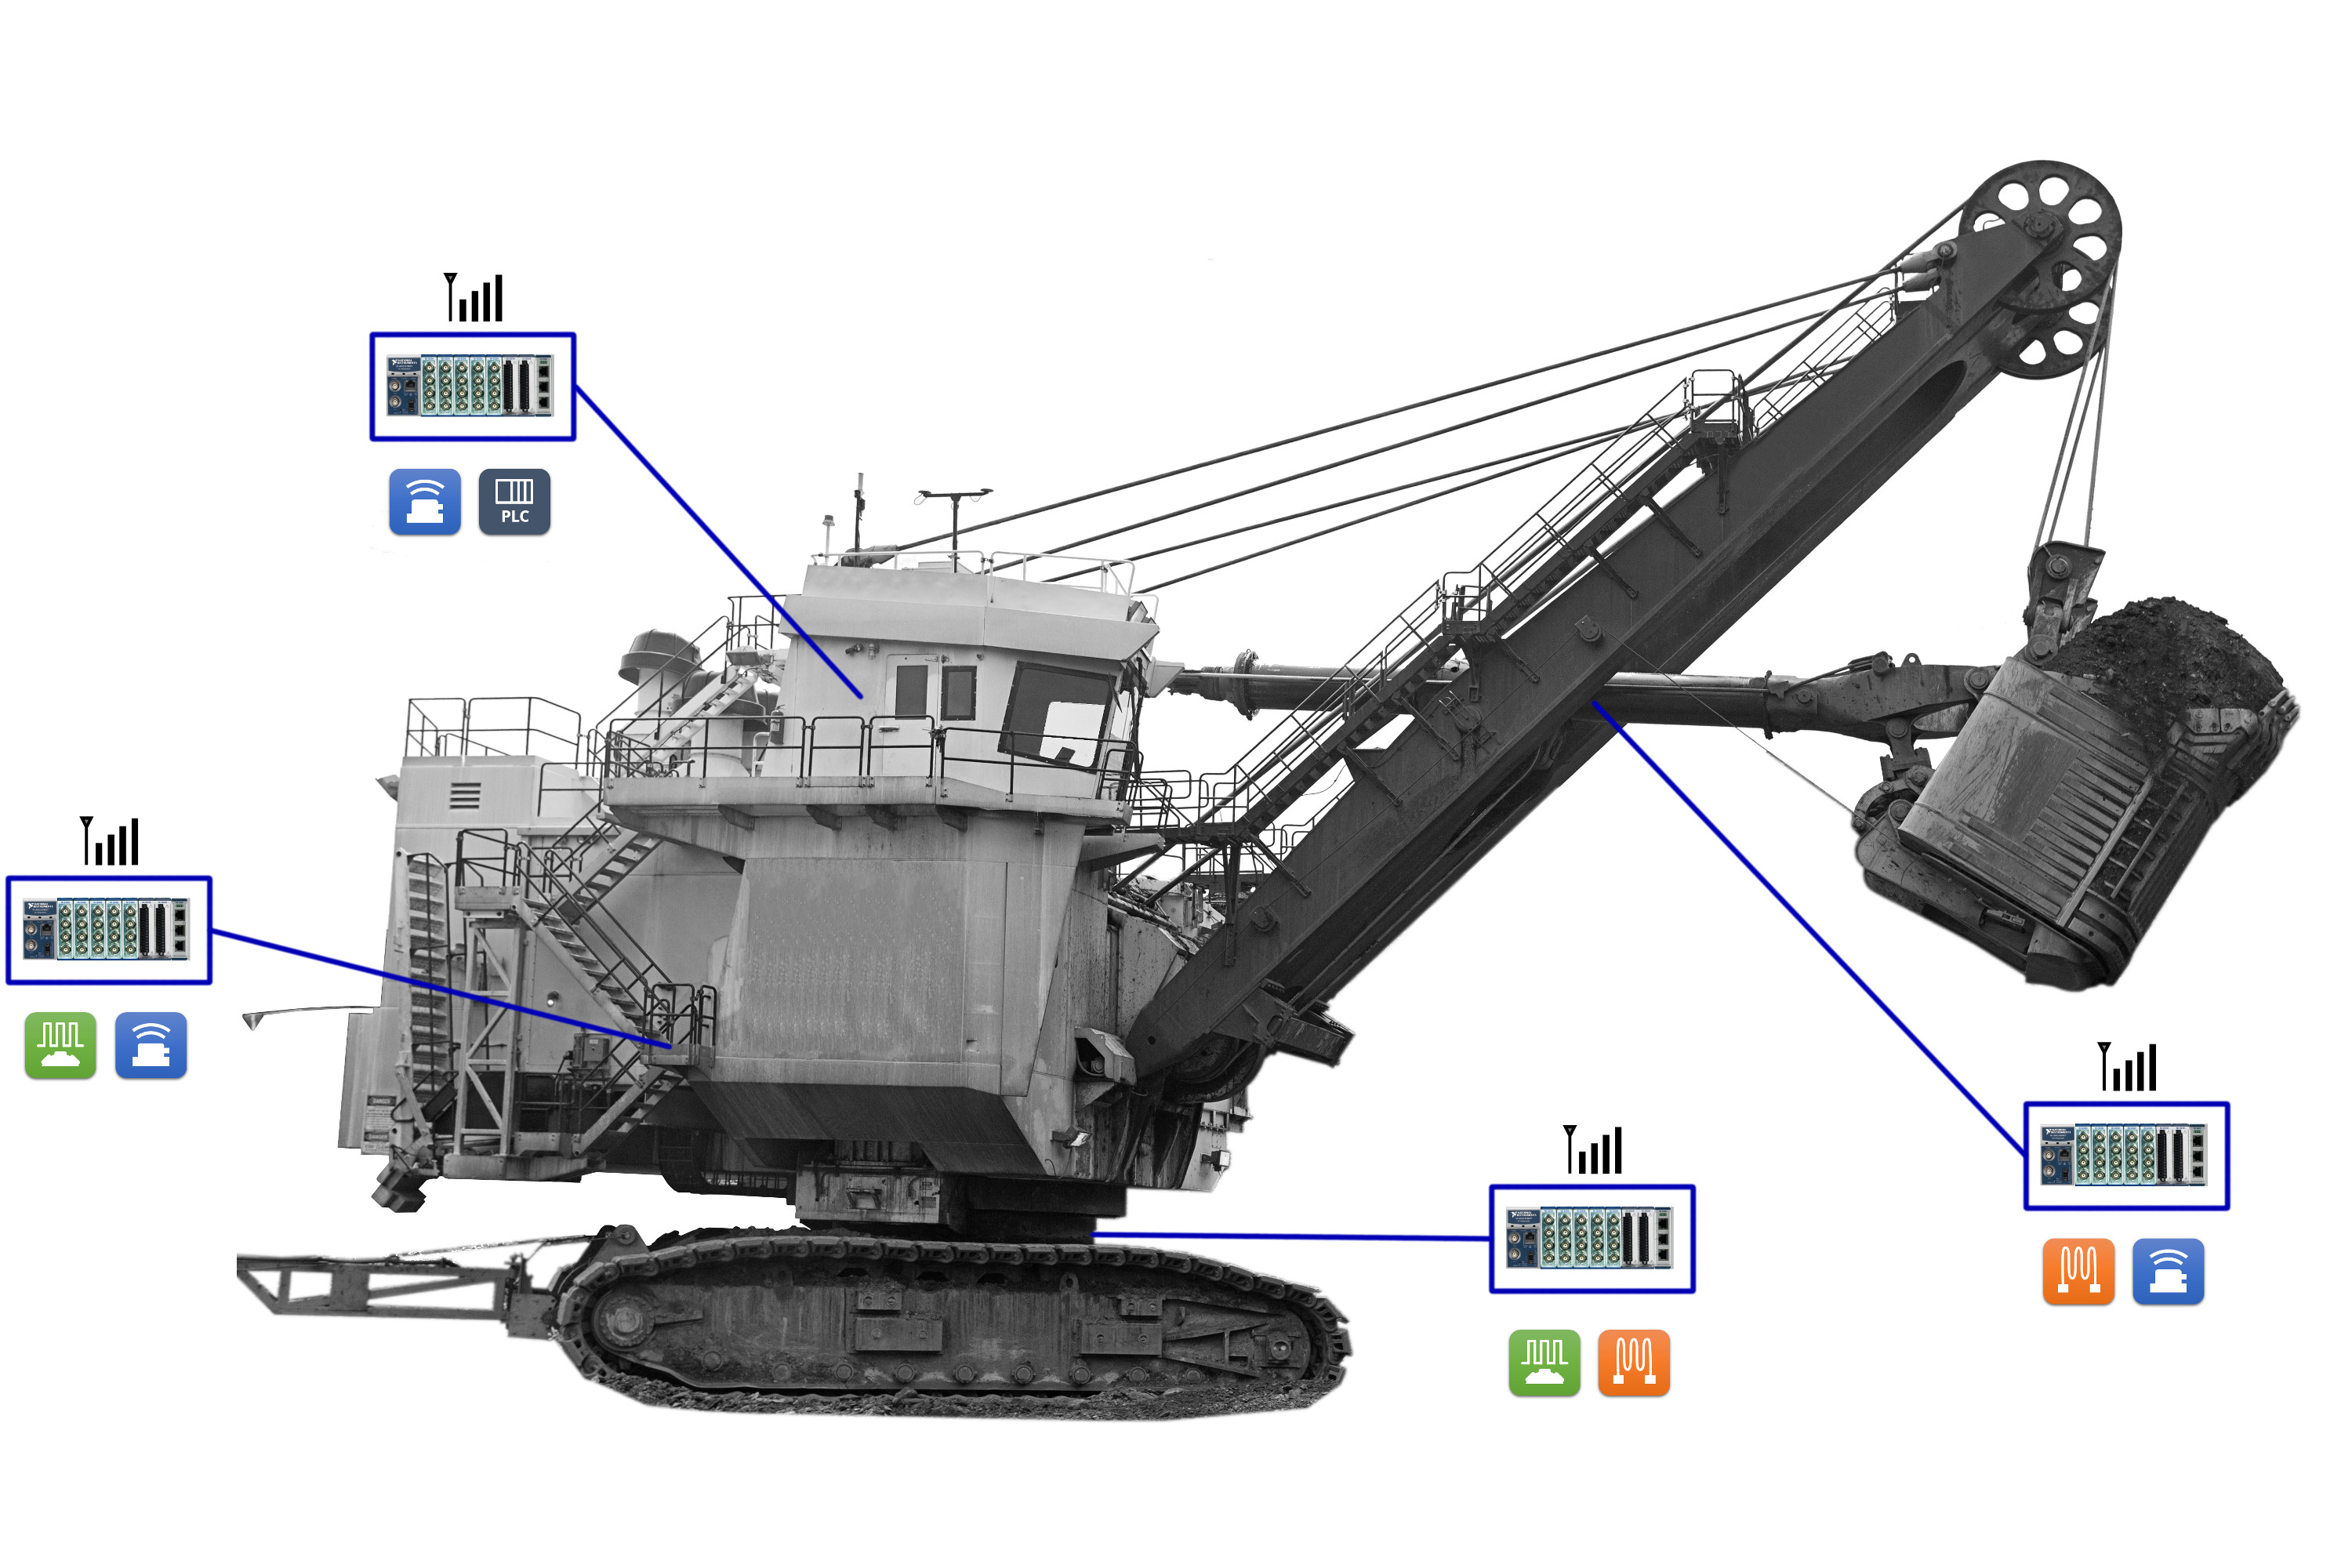 Embedded CompactRIO devices distributed on a rope shovel monitor structural and vibration health.